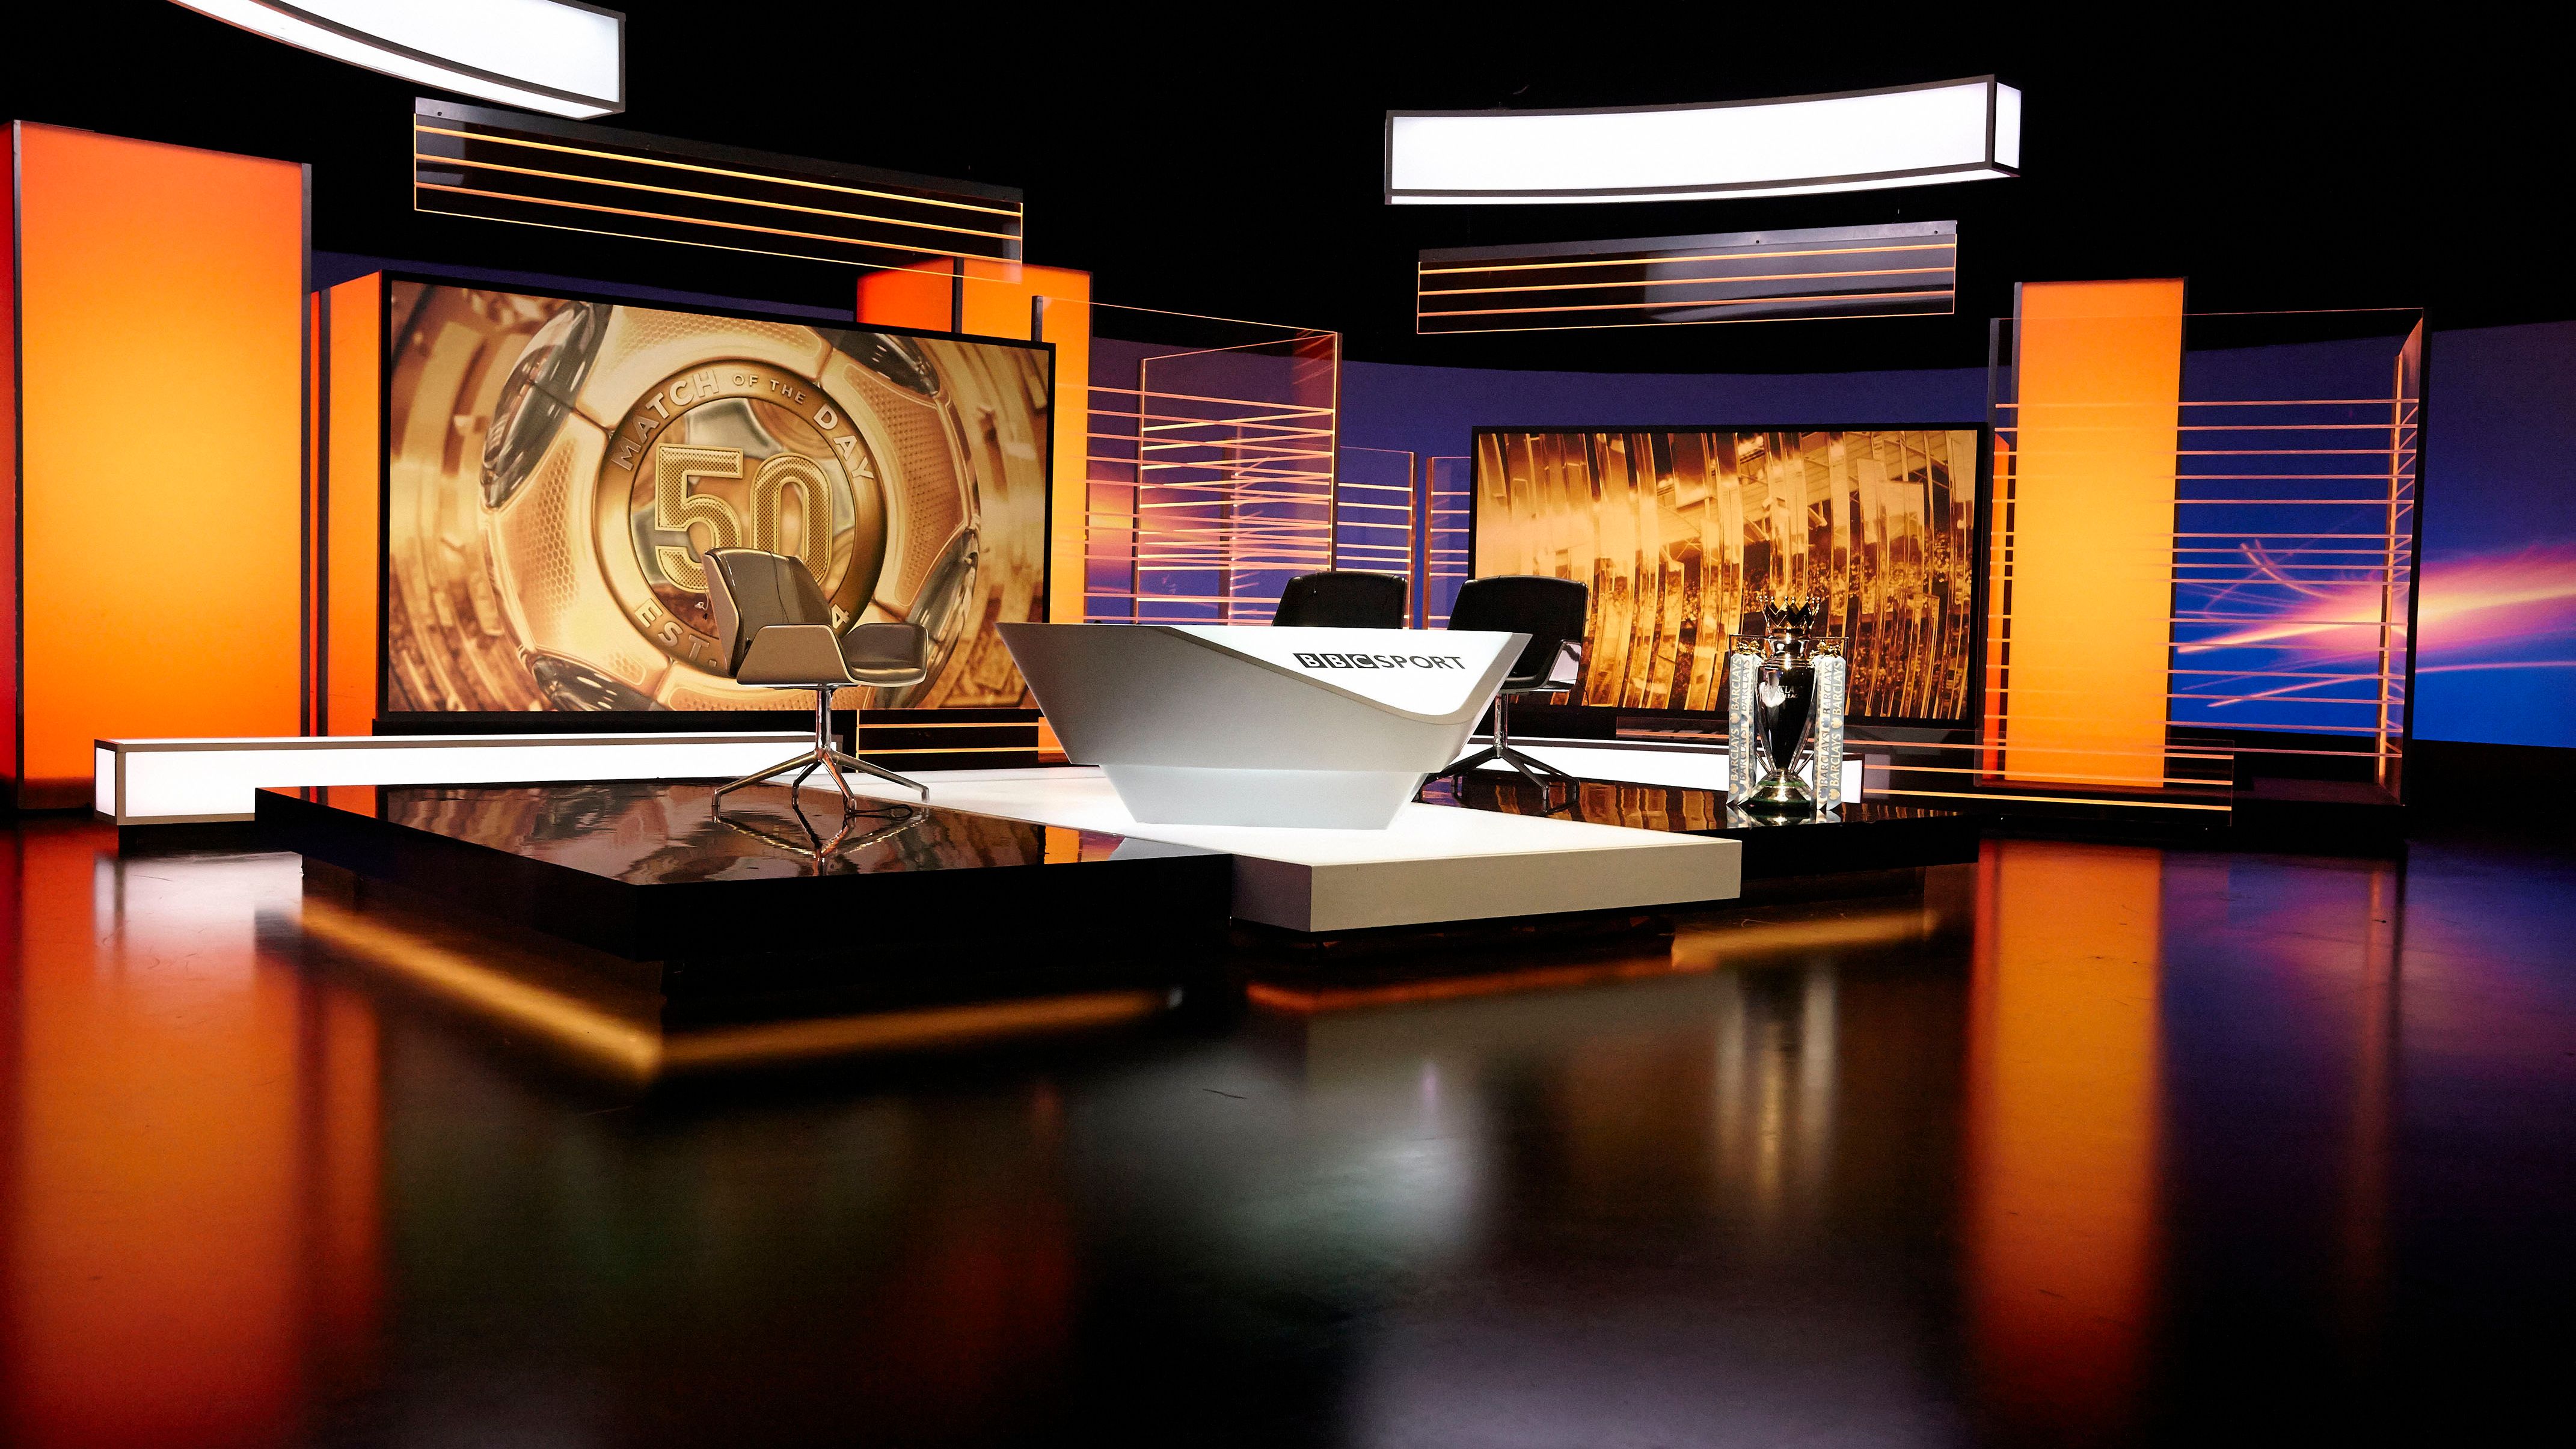 These empty BBC sets are monuments to some superb shows image 22